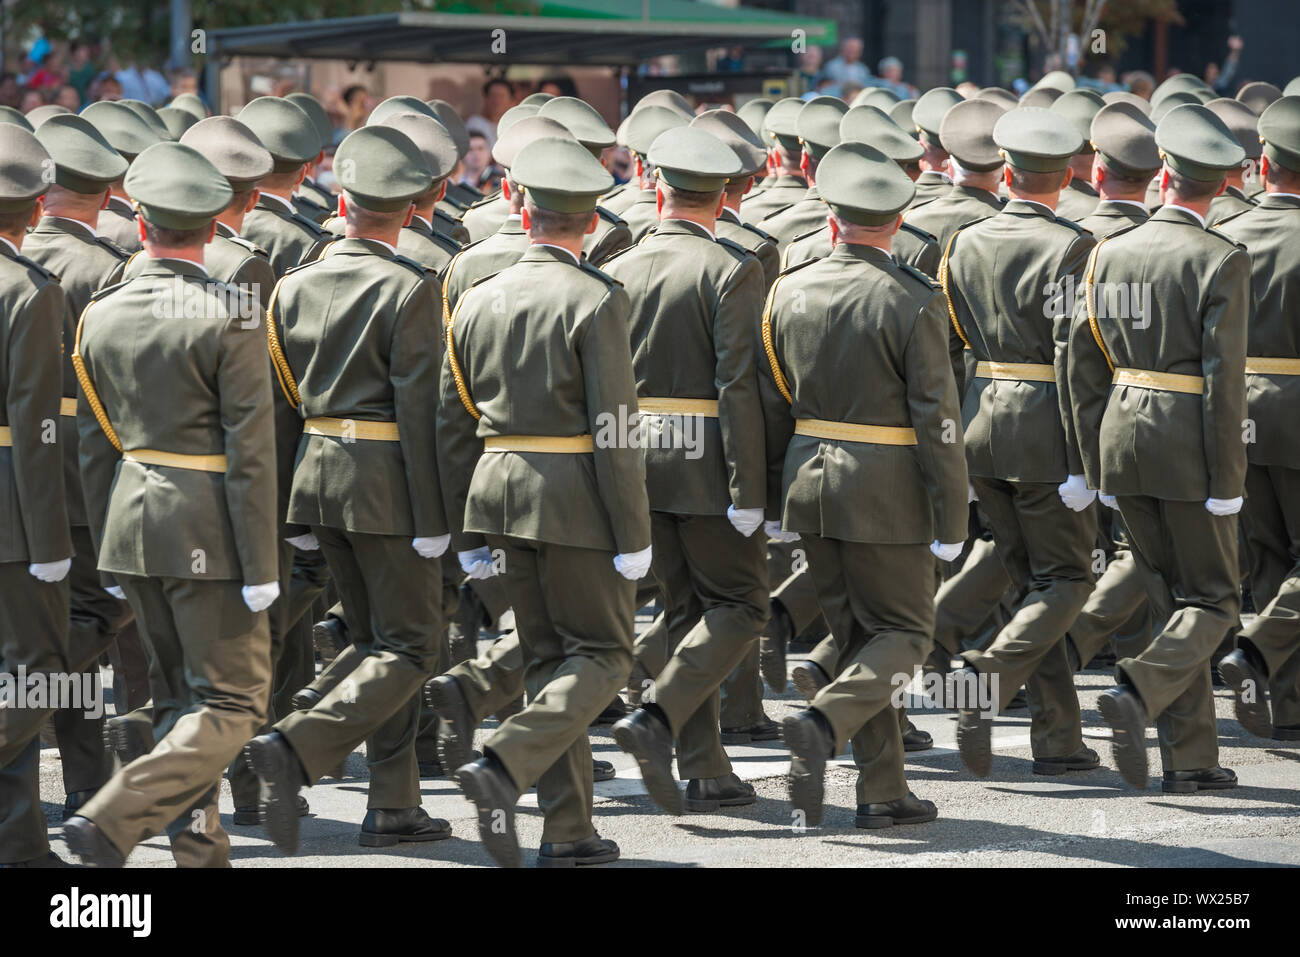 Army soldiers marching on military parade Stock Photo